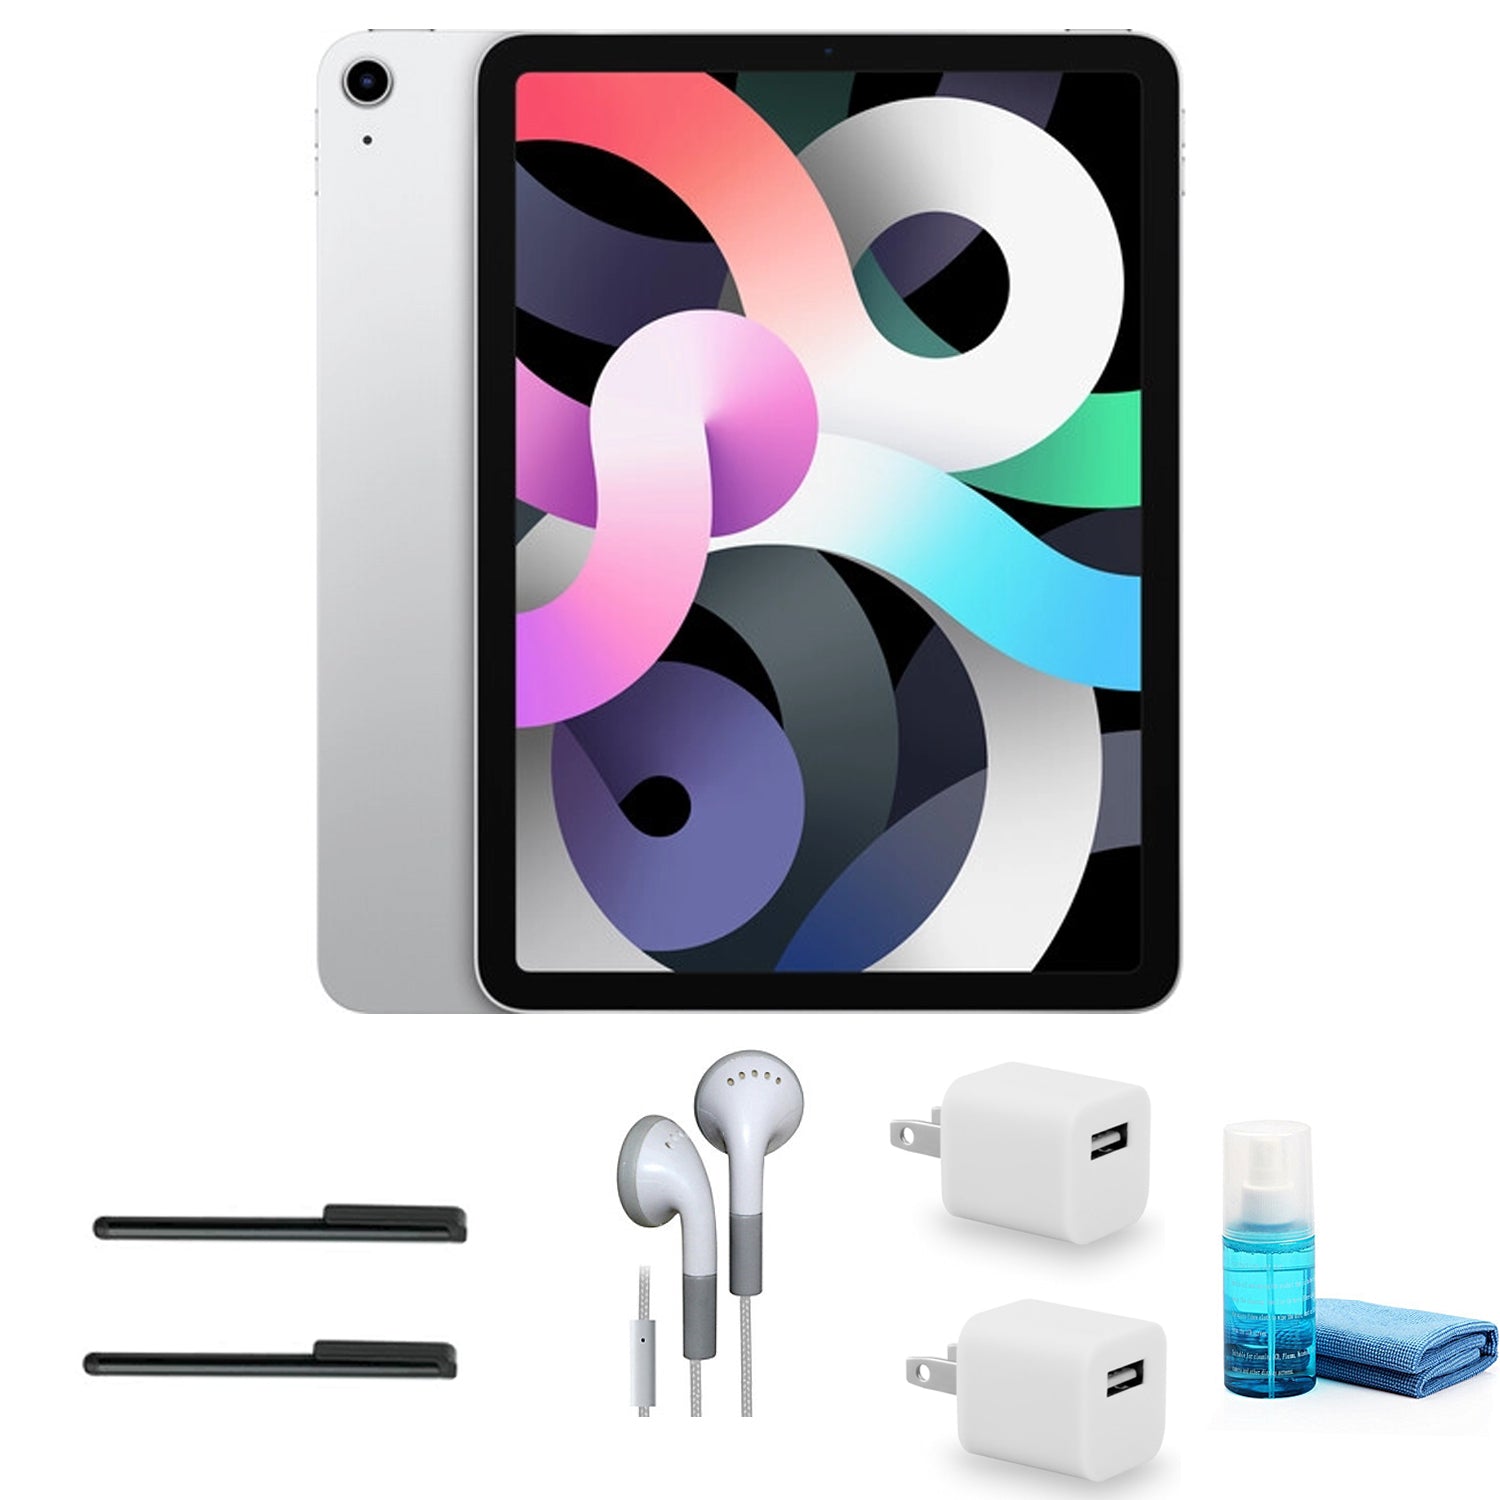 Apple 10.9 Inch iPad Air (64GB, Wi-Fi Only, Silver) with Earbuds + More